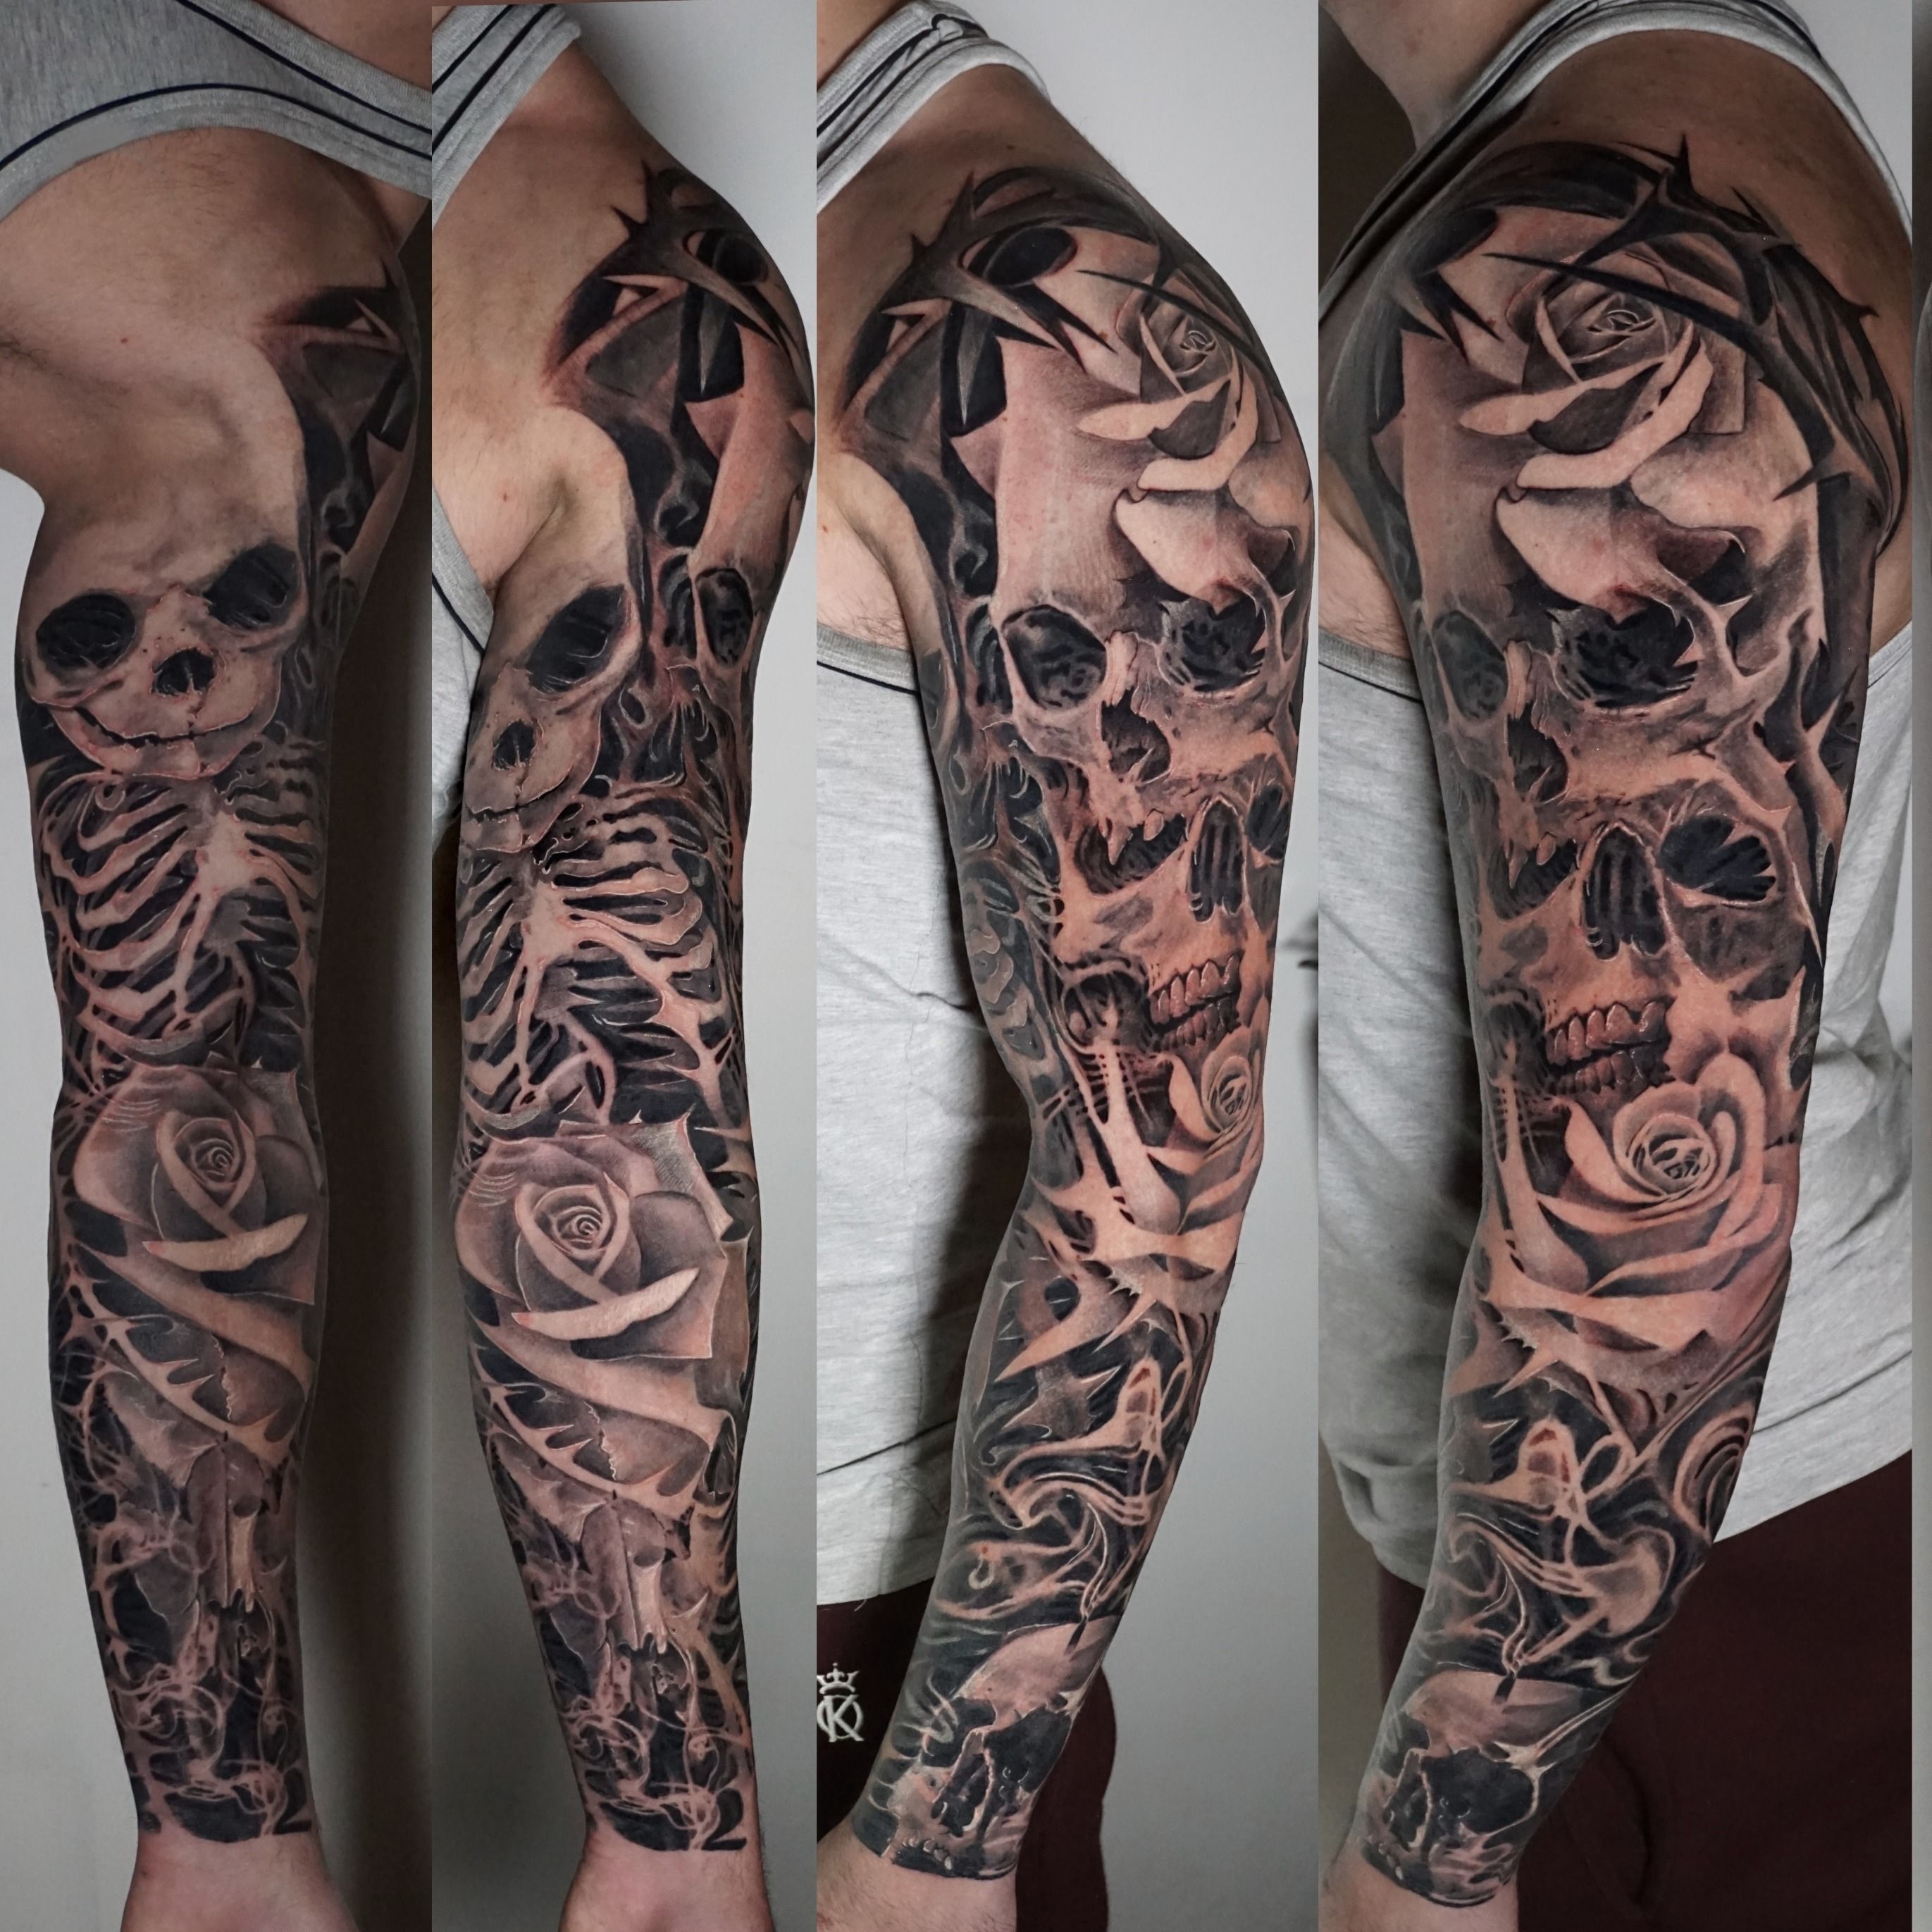 Tattoo uploaded by Alo Loco Tattoo • Black and grey full sleeve tattoo of Skulls and roses by Alo Loco London Best London tattoo artist • Tattoodo